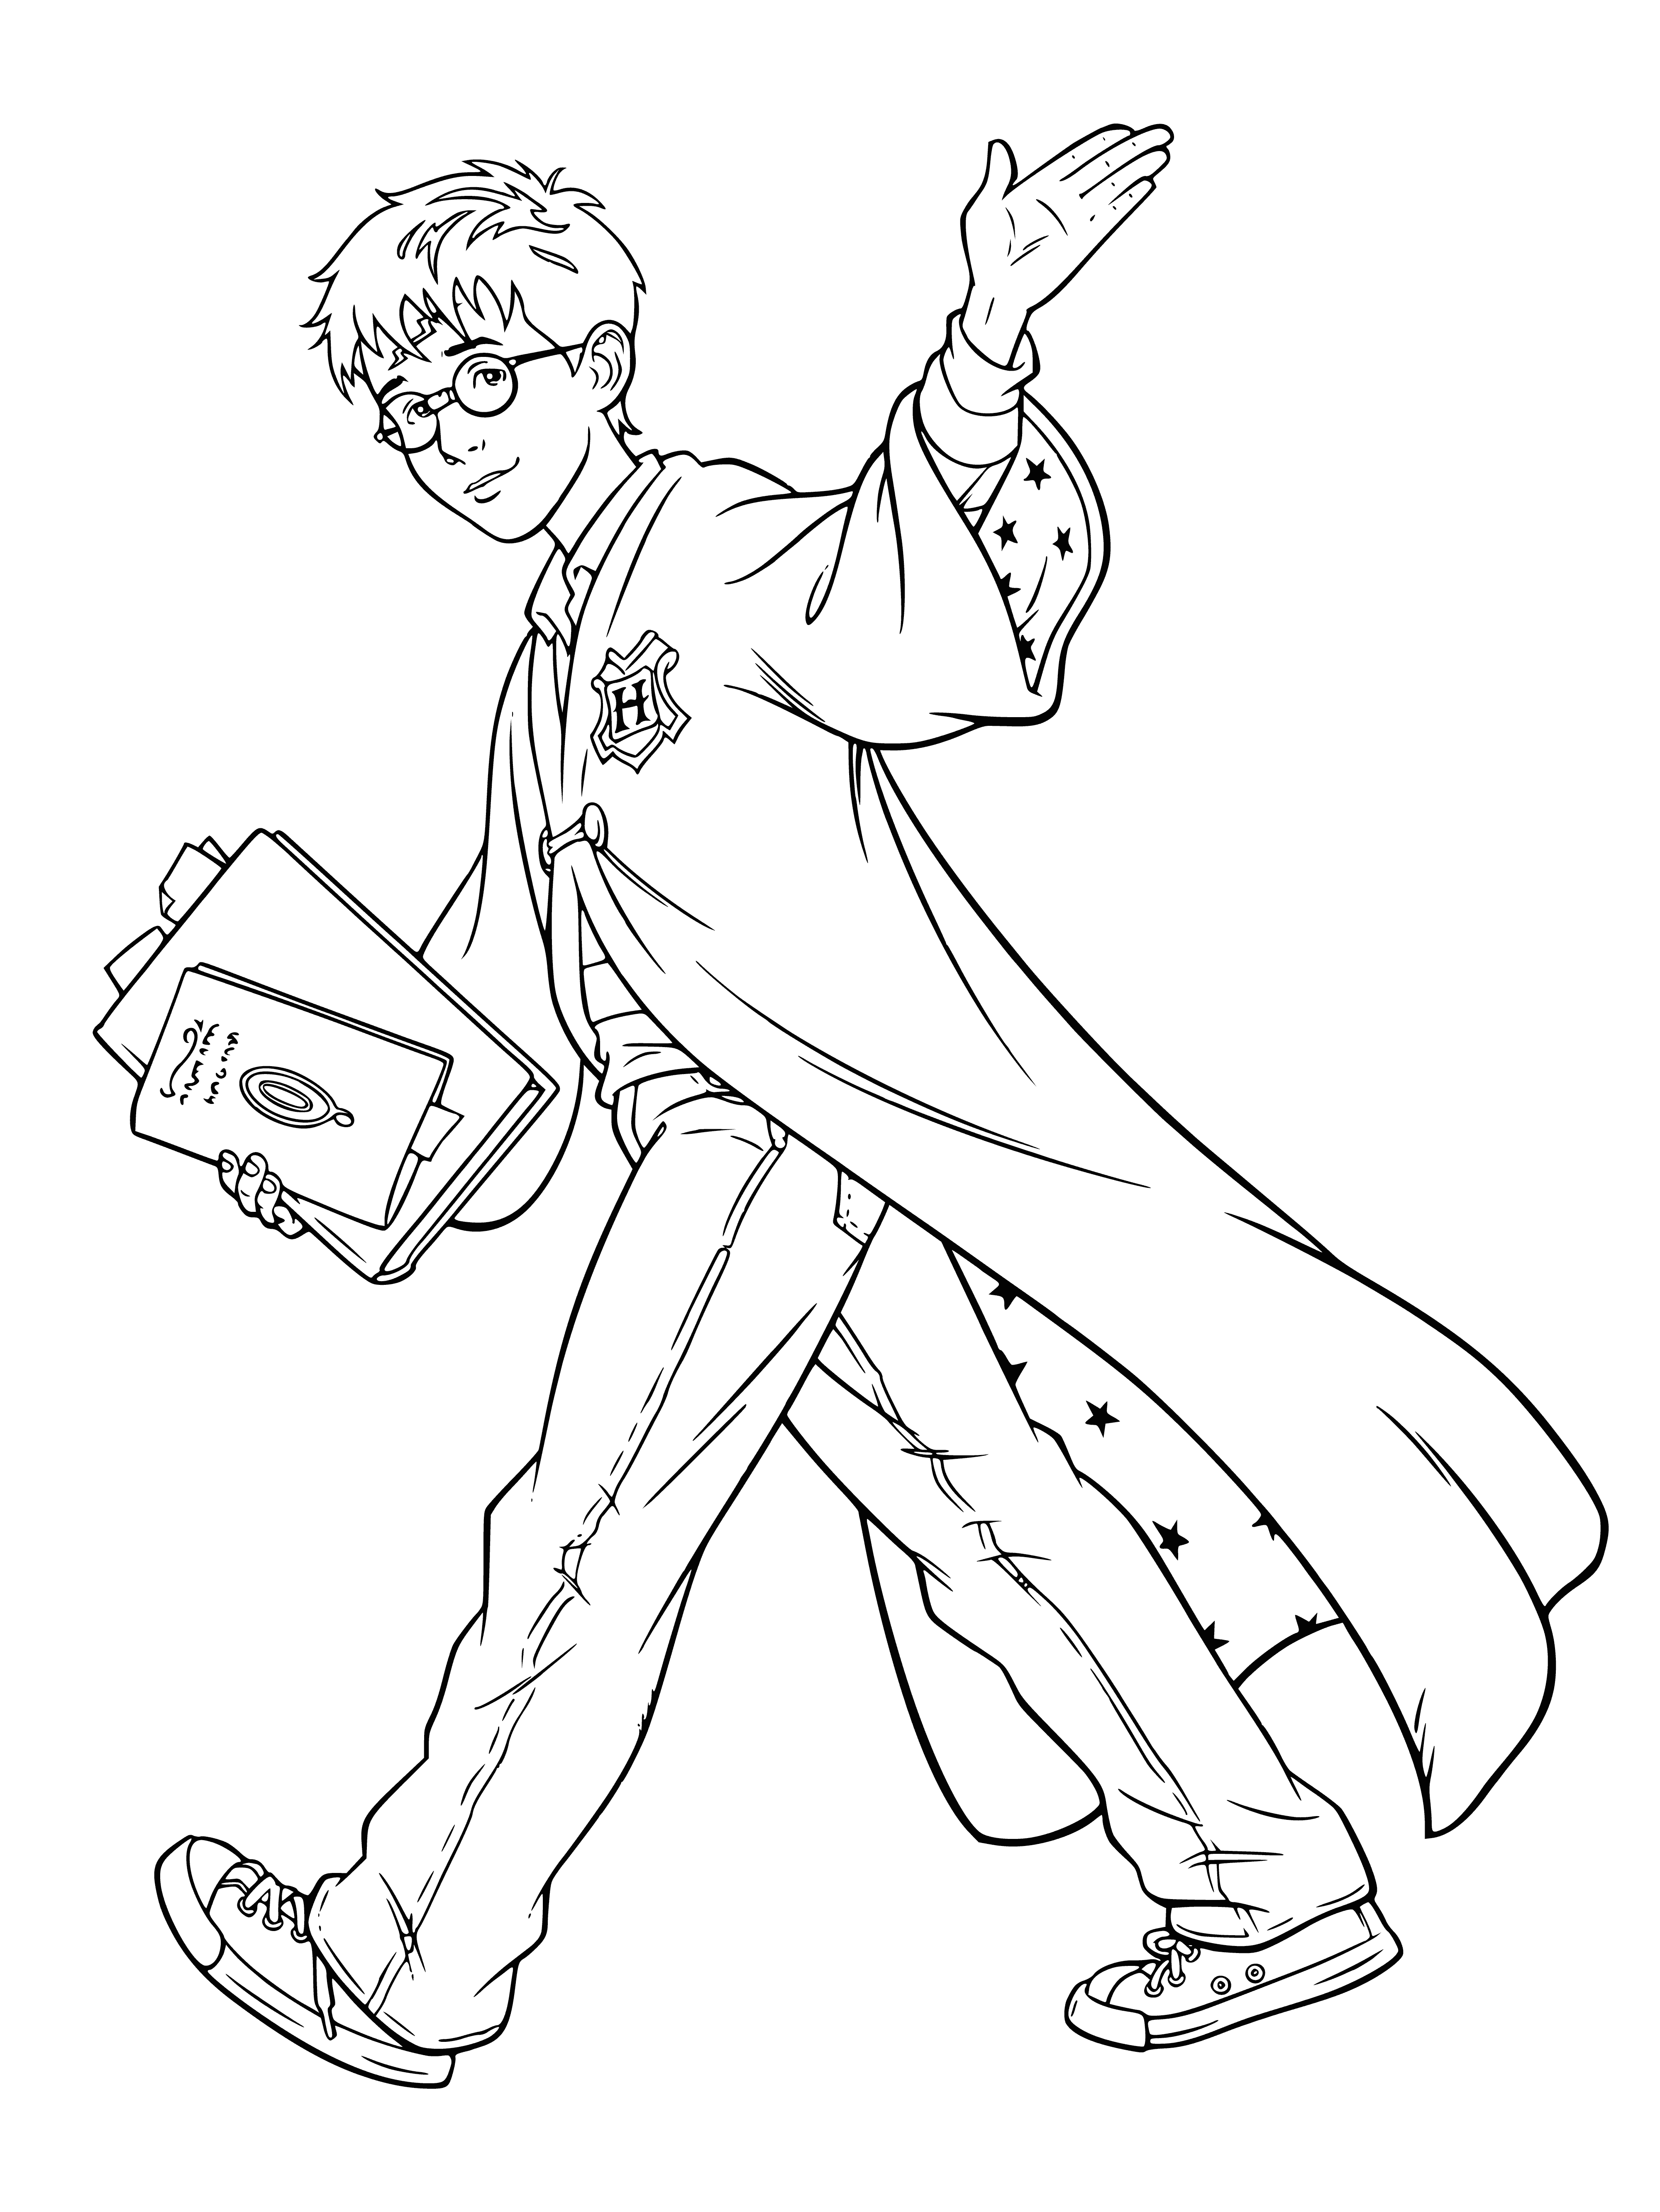 coloring page: Harry Potter, a young wizard in black robes, stands with a group before a large castle, with a golden scar on his forehead.